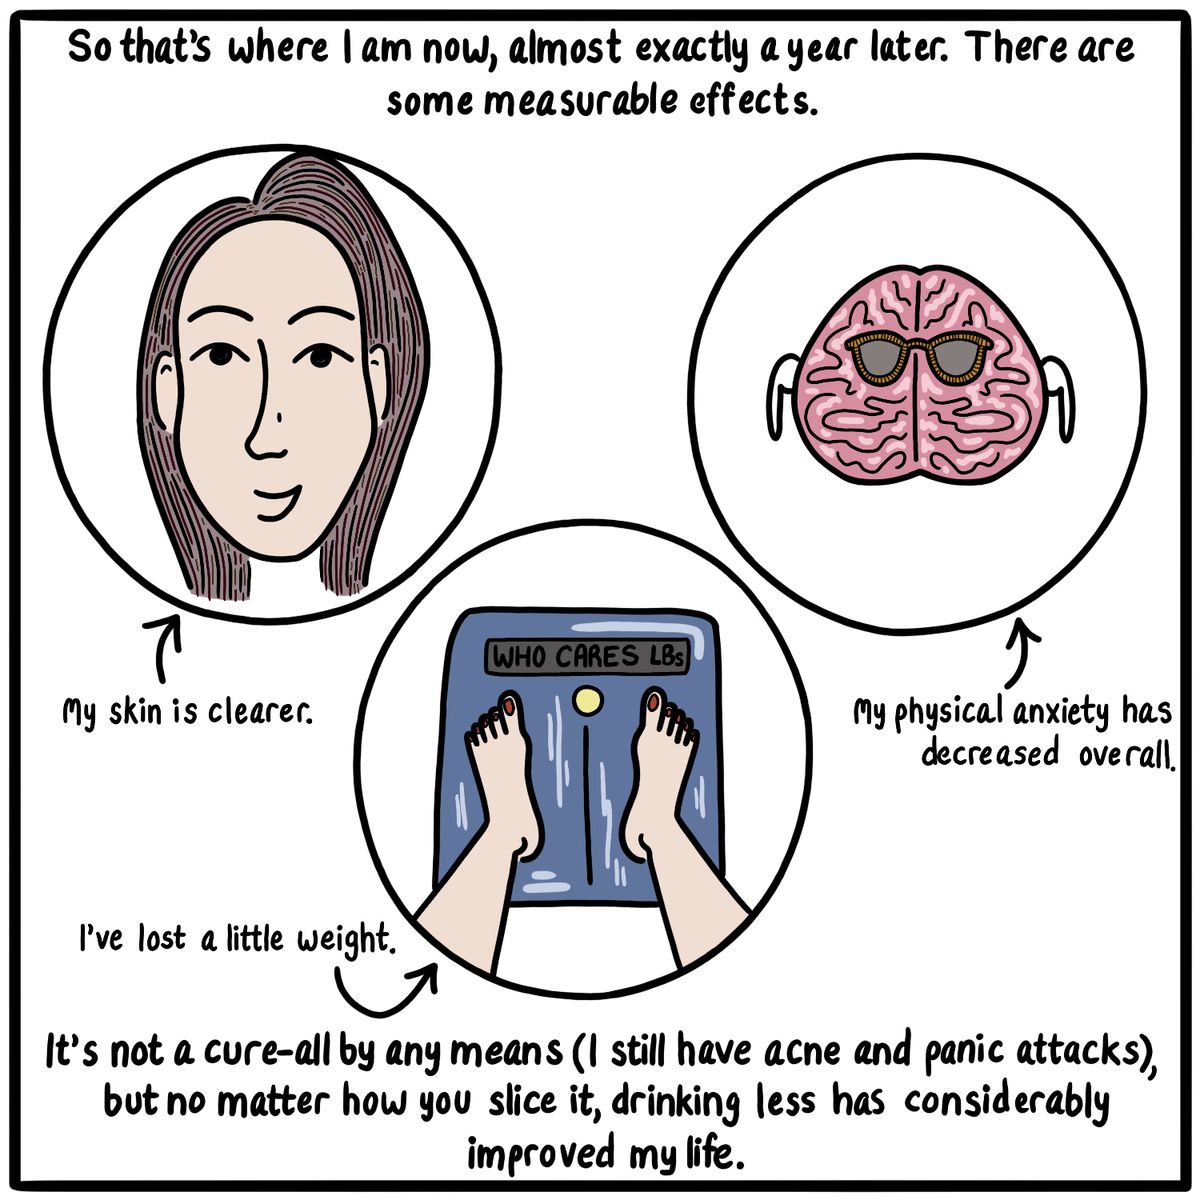 Image of woman’s face, a brain, and a scale. Caption reads “So that’s where I am now, almost exactly a year later. There are some measurable effects. My skin is clearer. My physical anxiety has decreased overall. I’ve lost a little weight. It’s not a cure-all by any means (I still have acne and panic attacks), but no matter how you slice it, drinking less has considerably improved my life.”